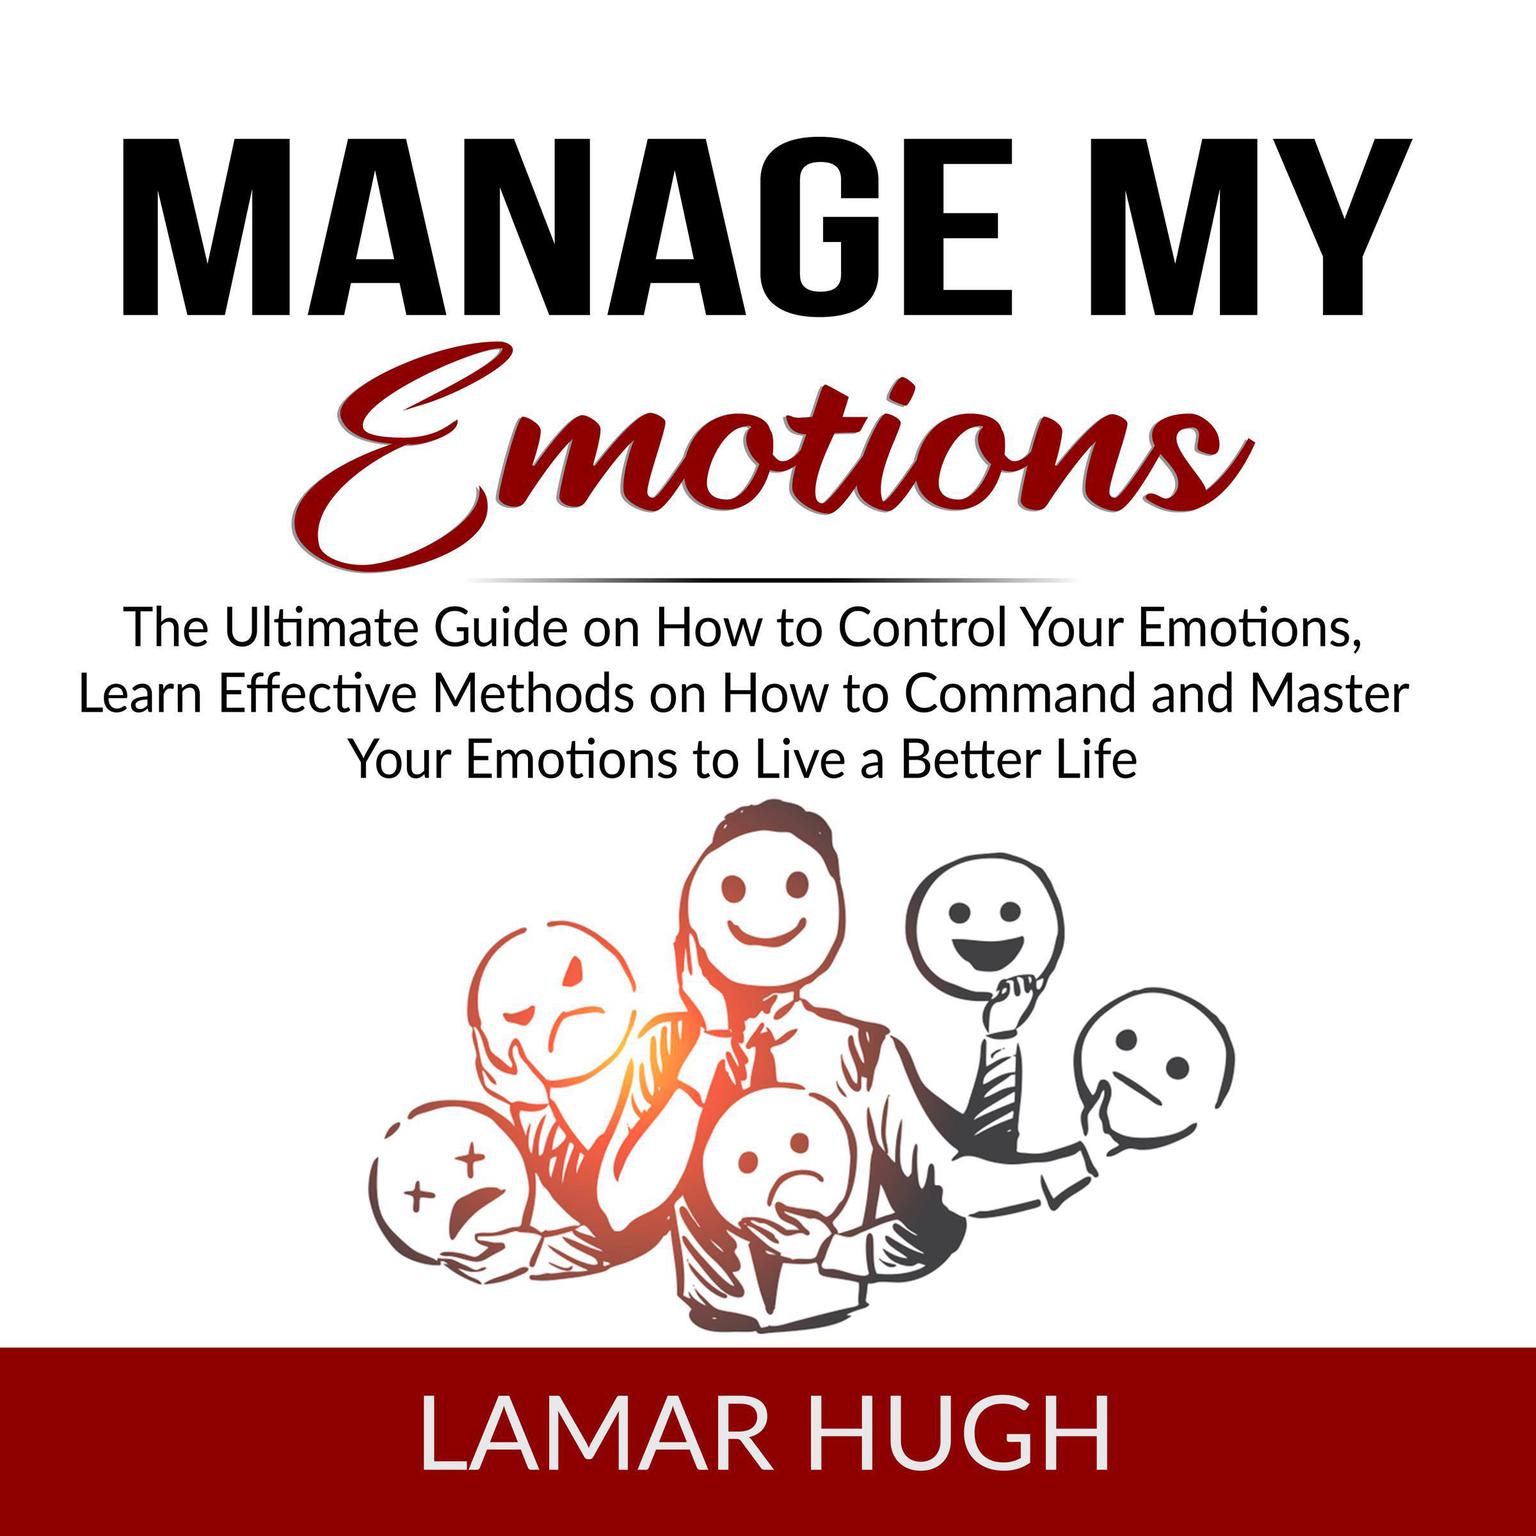 Manage my Emotions: The Ultimate Guide on How to Control Your Emotions, Learn Effective Methods on How to Command and Master Your Emotions to Live a Better Life  Audiobook, by Lamar Hugh